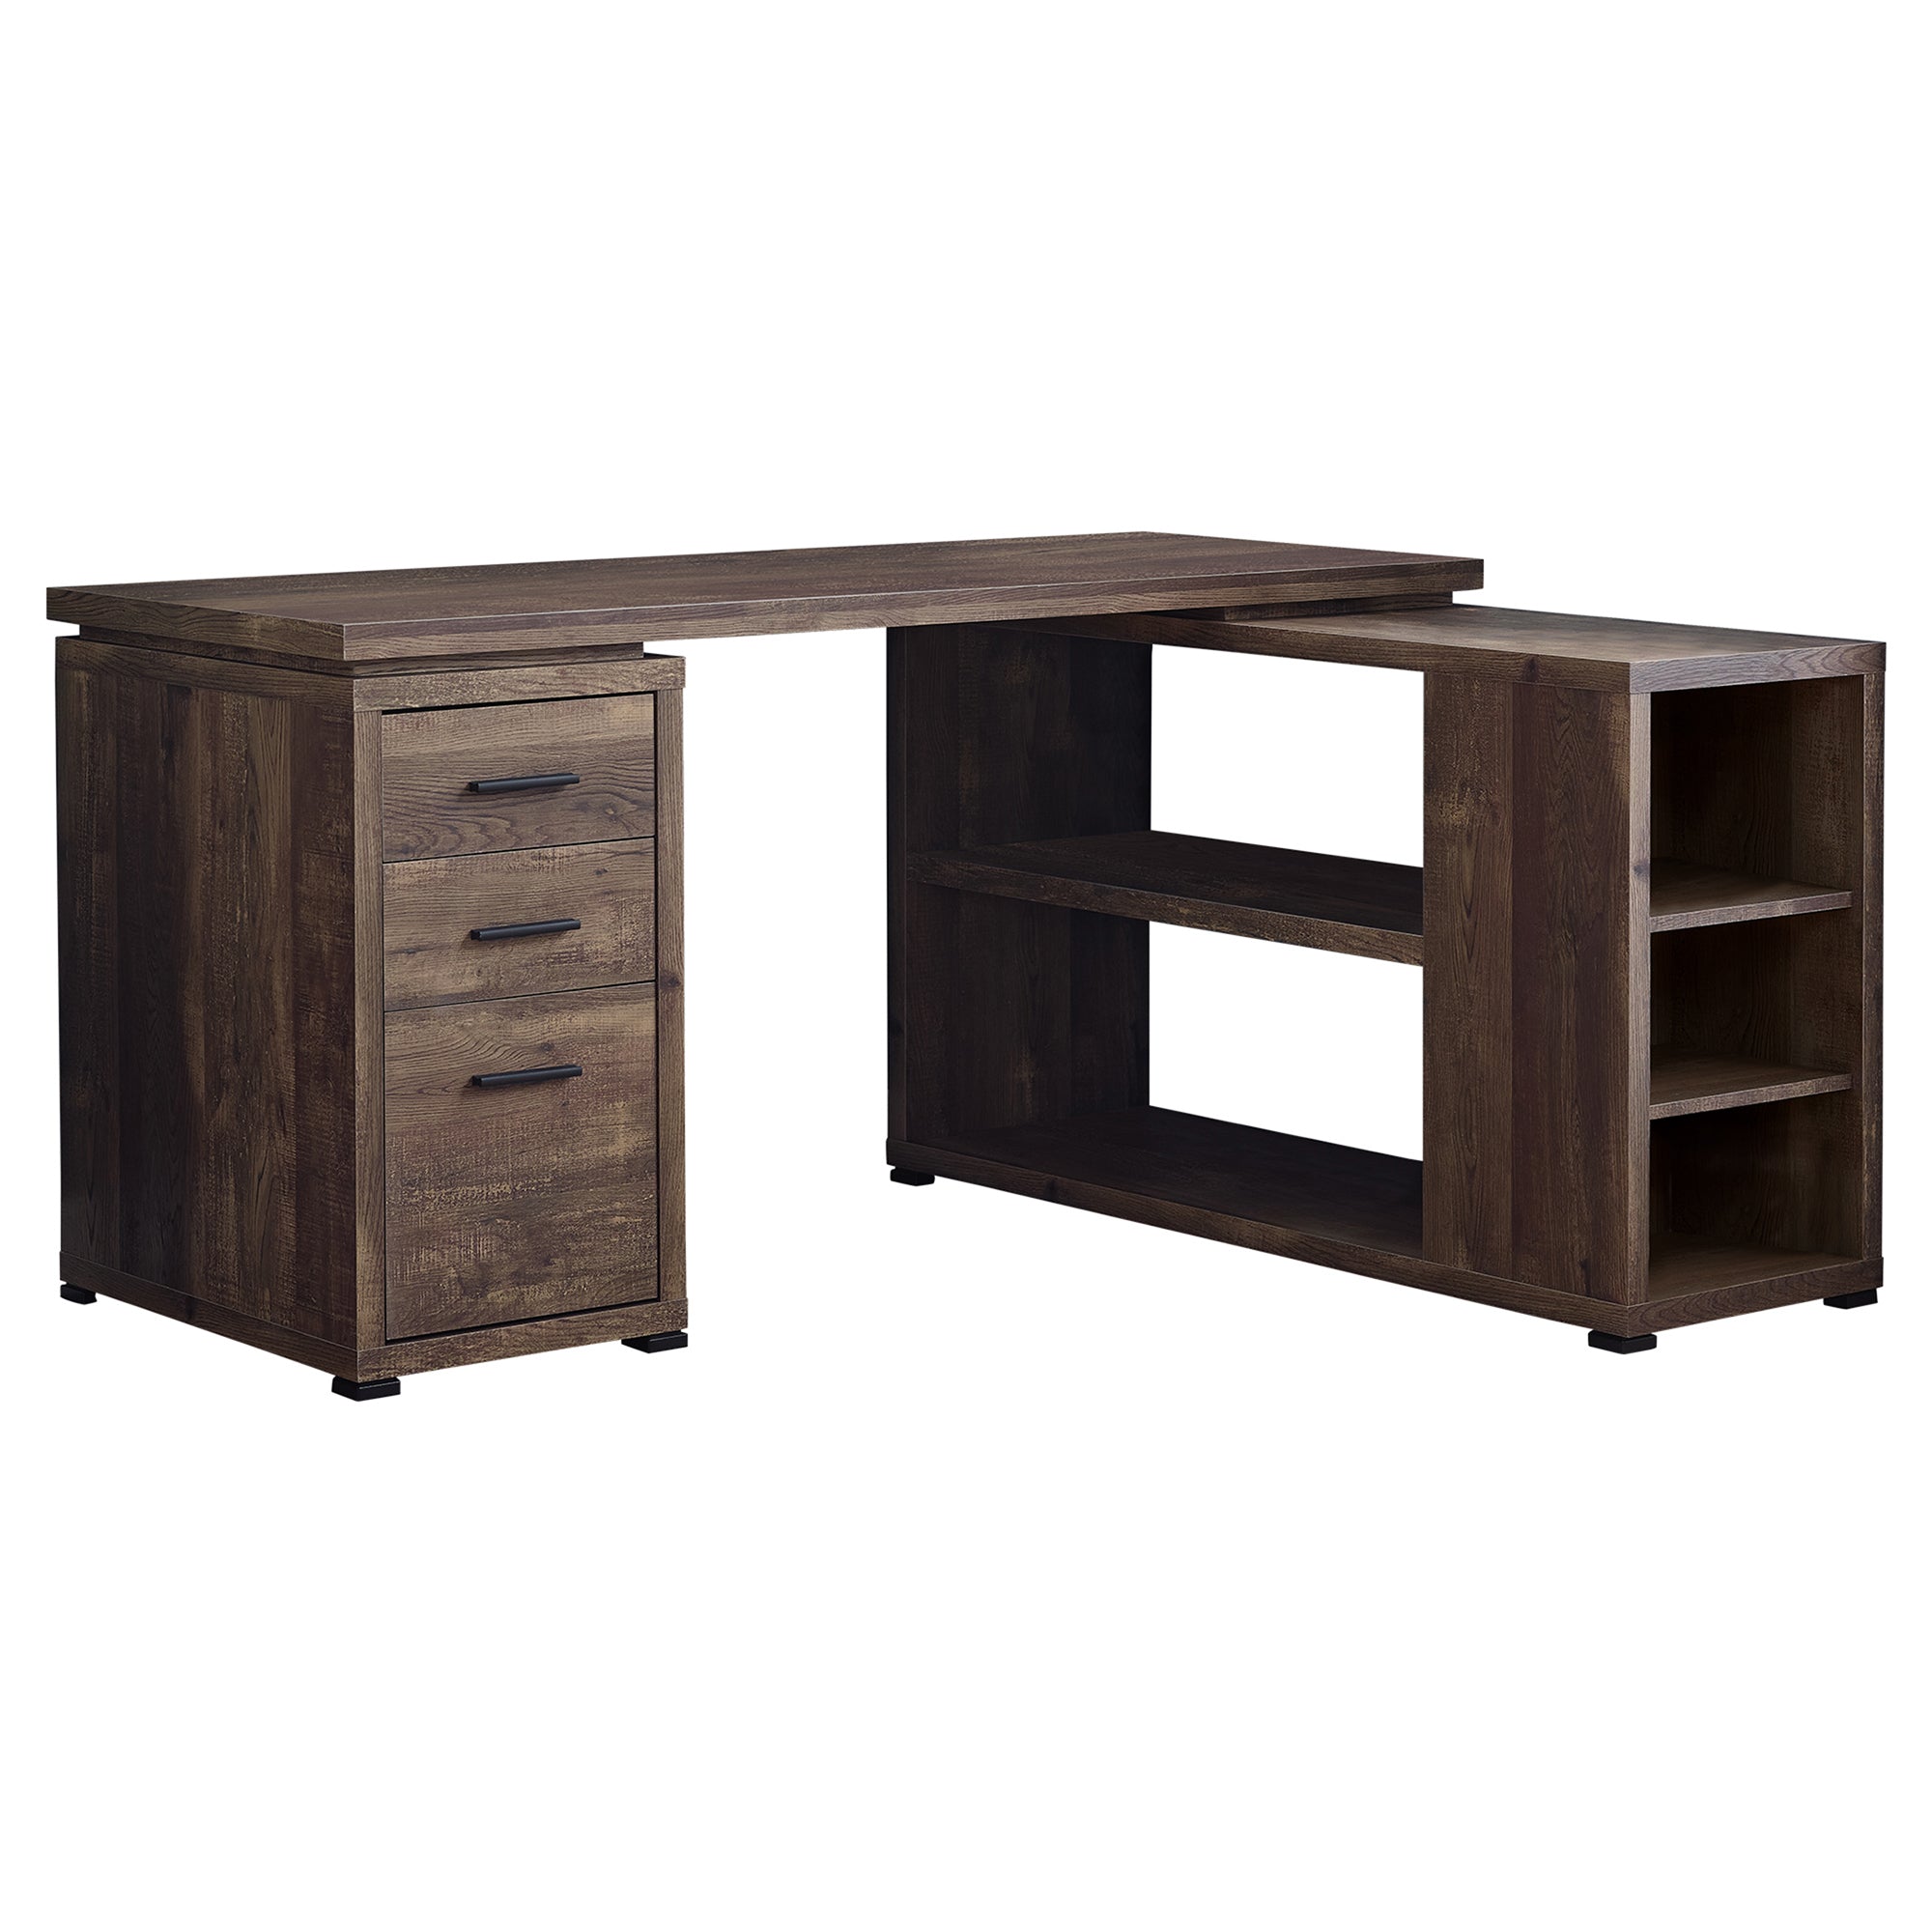 MN-867420    Computer Desk, Home Office, Corner, Left, Right Set-Up, Storage Drawers, L Shape, Laminate, Brown Reclaimed Wood Look, Contemporary, Modern